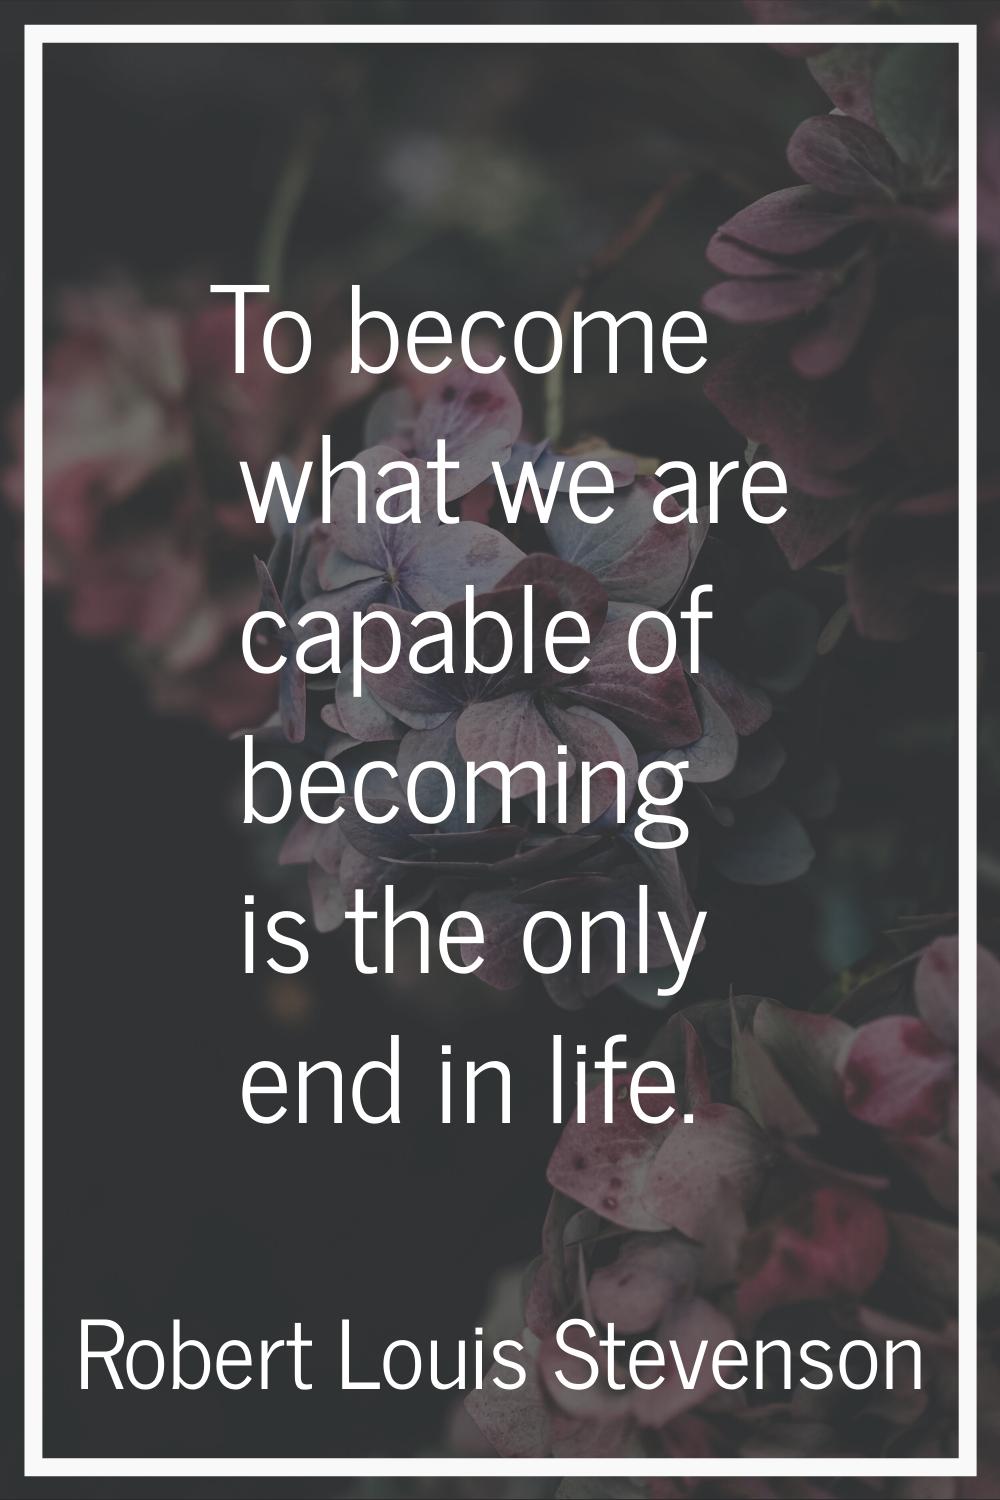 To become what we are capable of becoming is the only end in life.